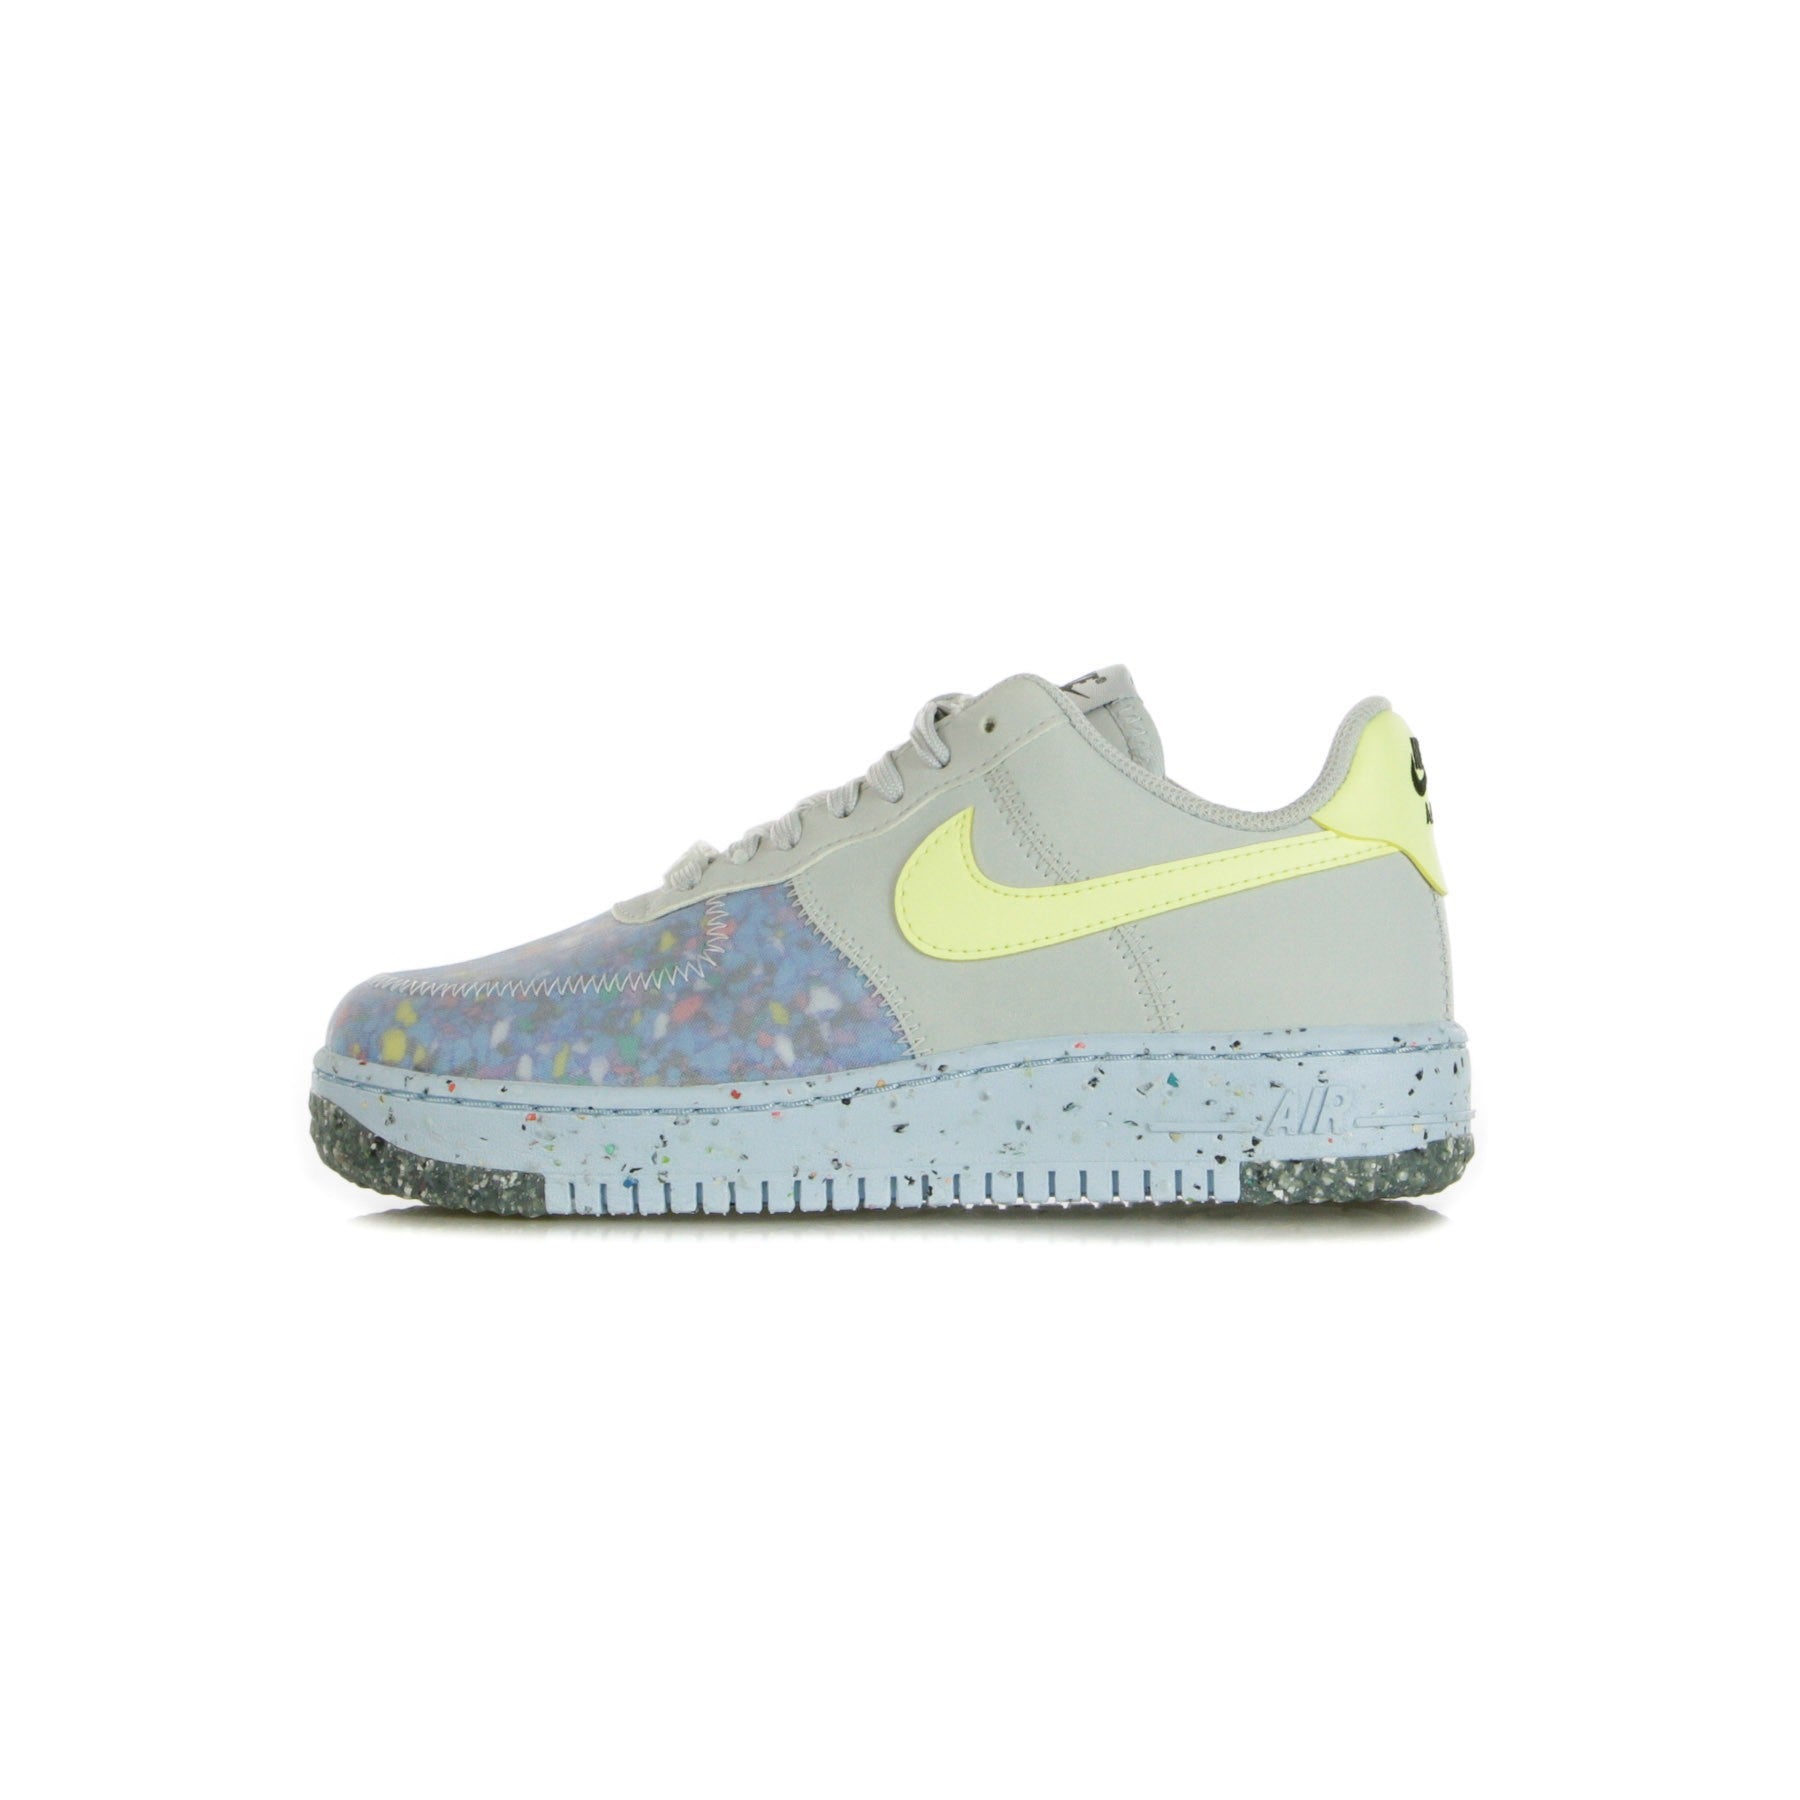 W Air Force 1 Crater Pure Platinum/barely Volt/summit White Women's Low Shoe